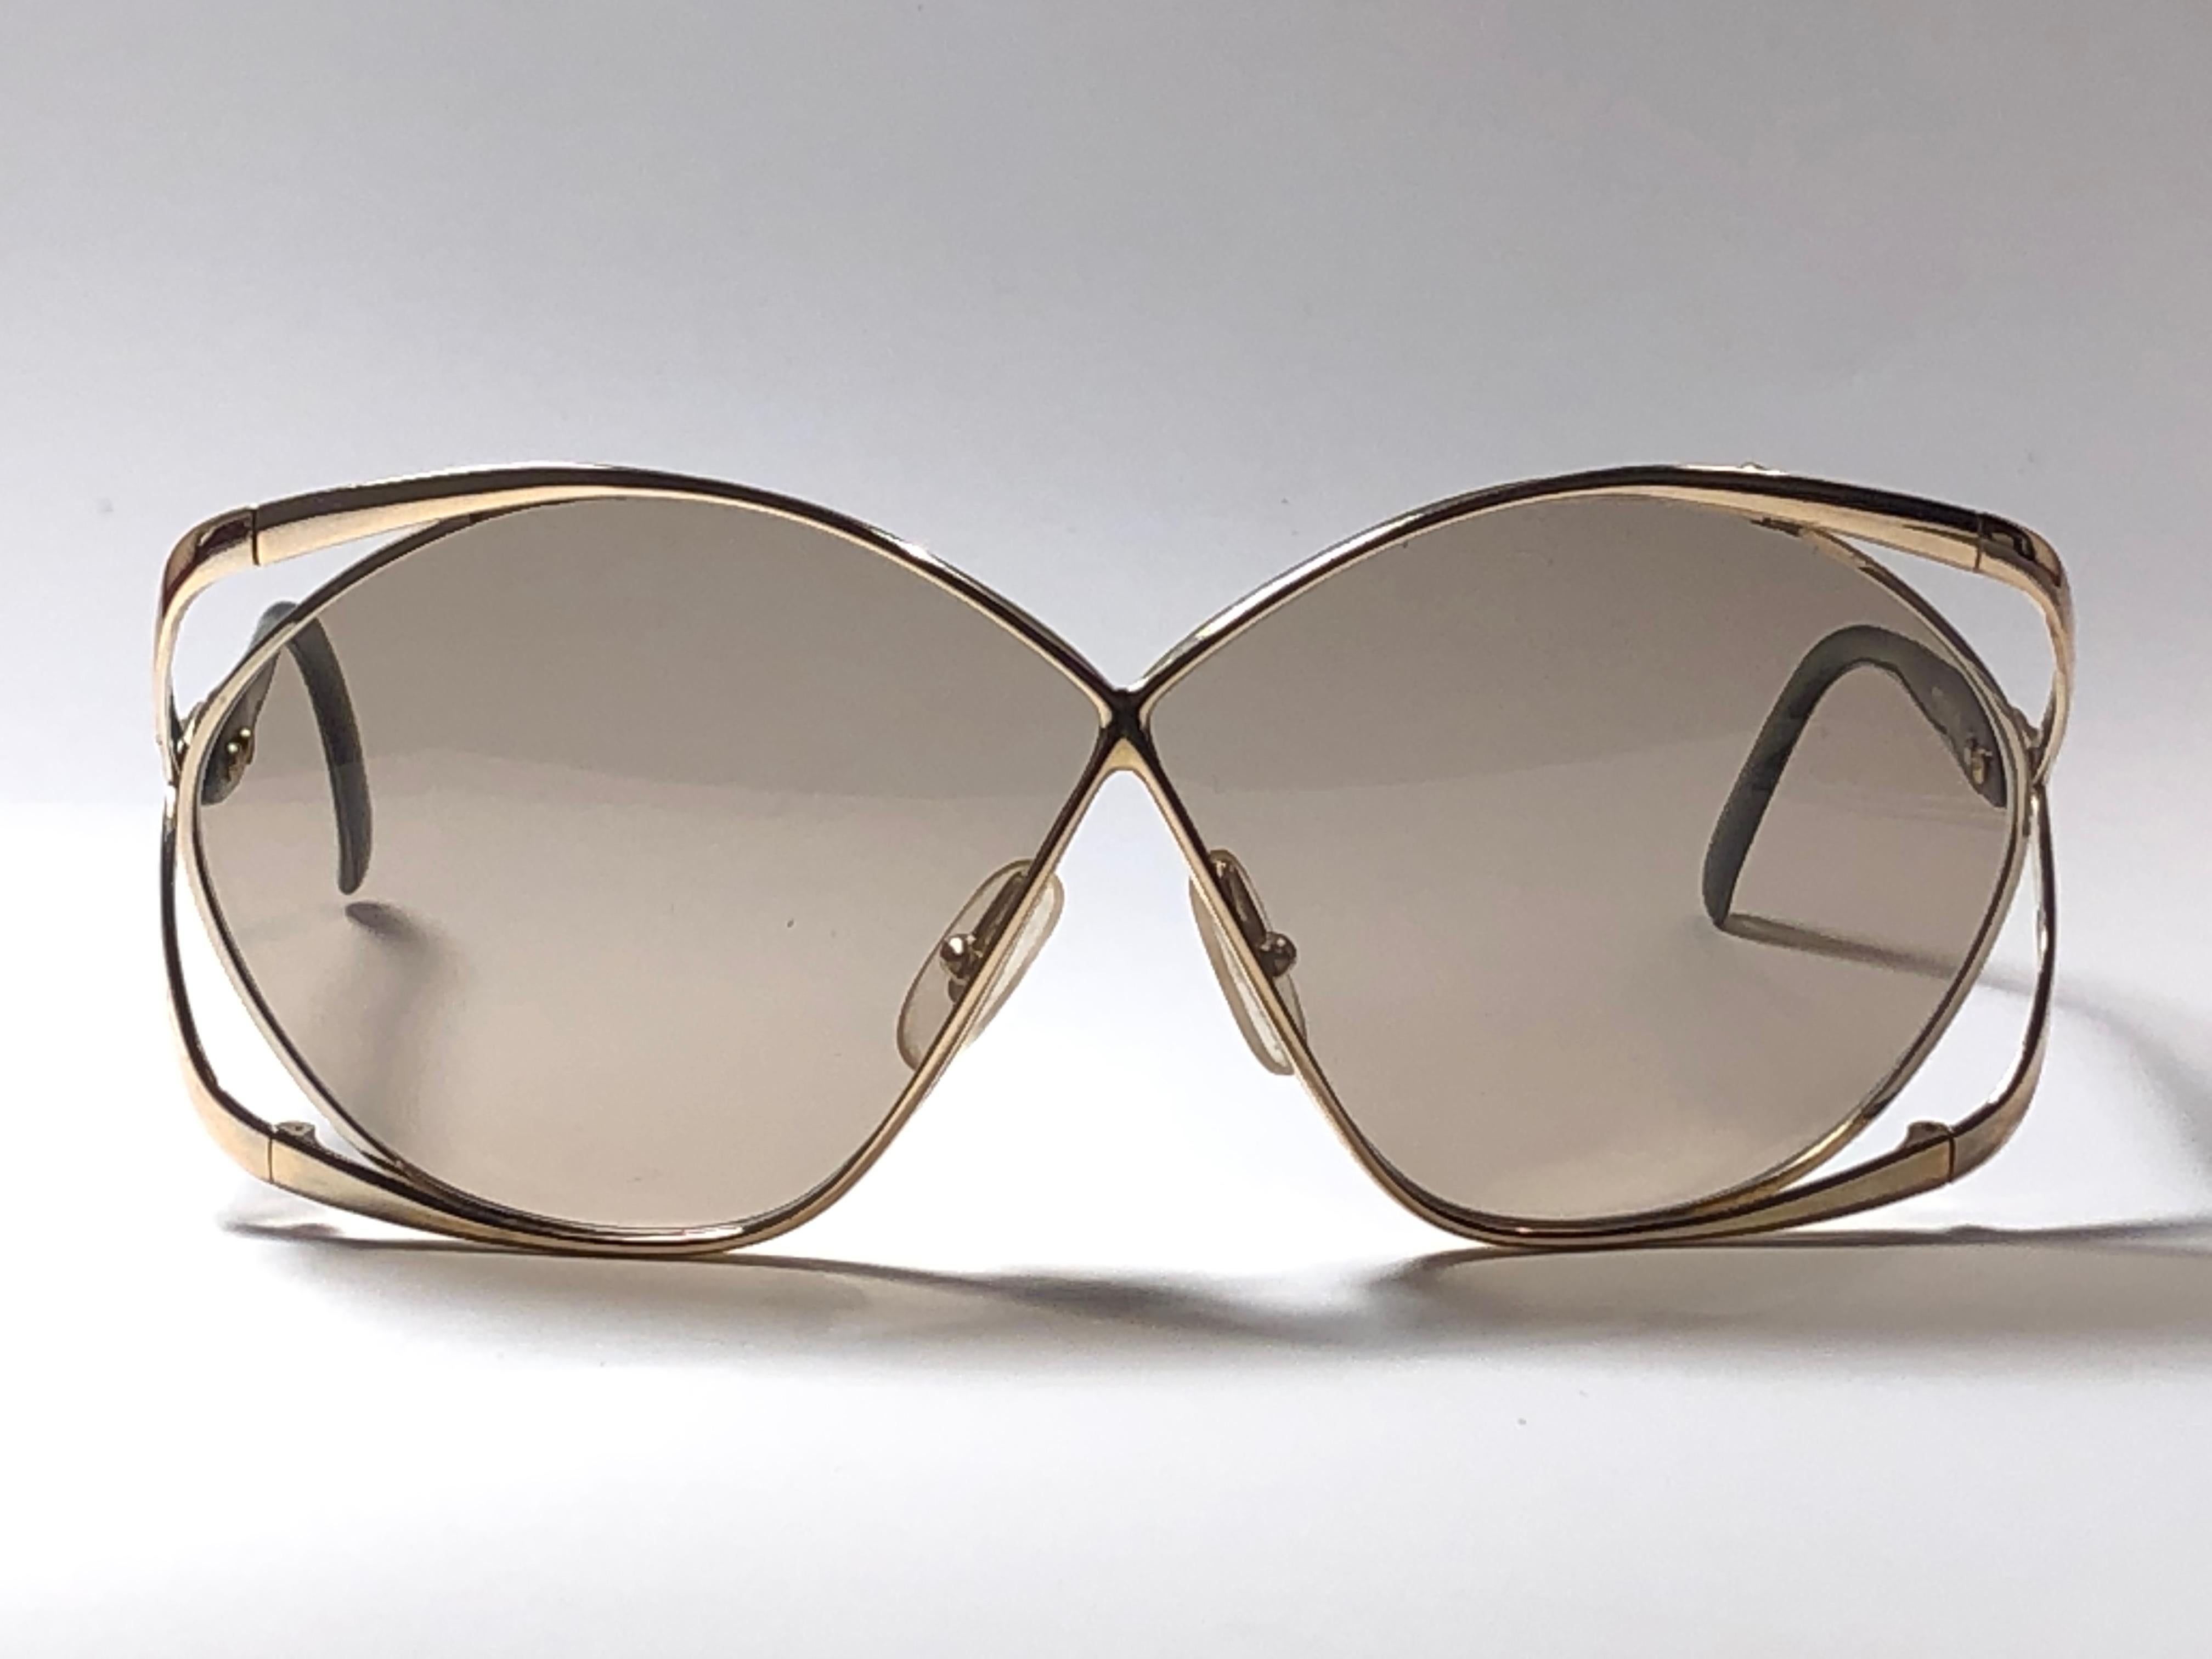 
Highly coveted Christian Dior butterly shape in gold & translucent green. 
Brown gradient lenses. A collector’s piece!
 
Come with its original Christian Dior lunettes sleeve.
 
New, never worn or displayed. Made in austria.


